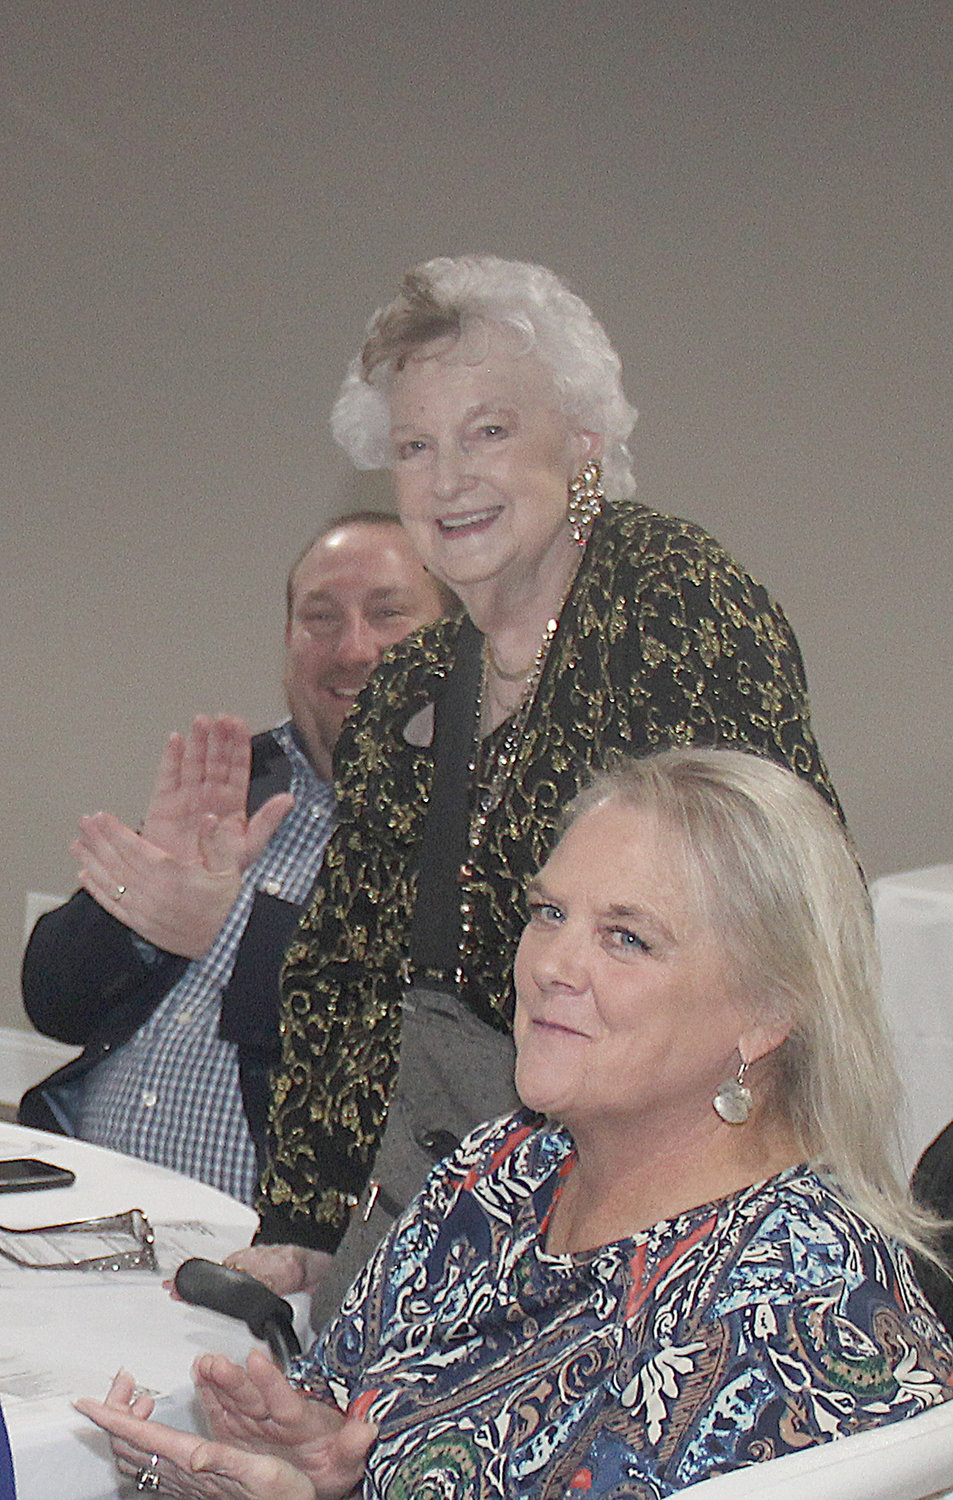 LONGTIME MEMBER — Alouise Marschel, standing, receives applause and cheers as she is recognized as the Warrenton Chamber’s longest active member during the group’s 100th anniversary banquet.